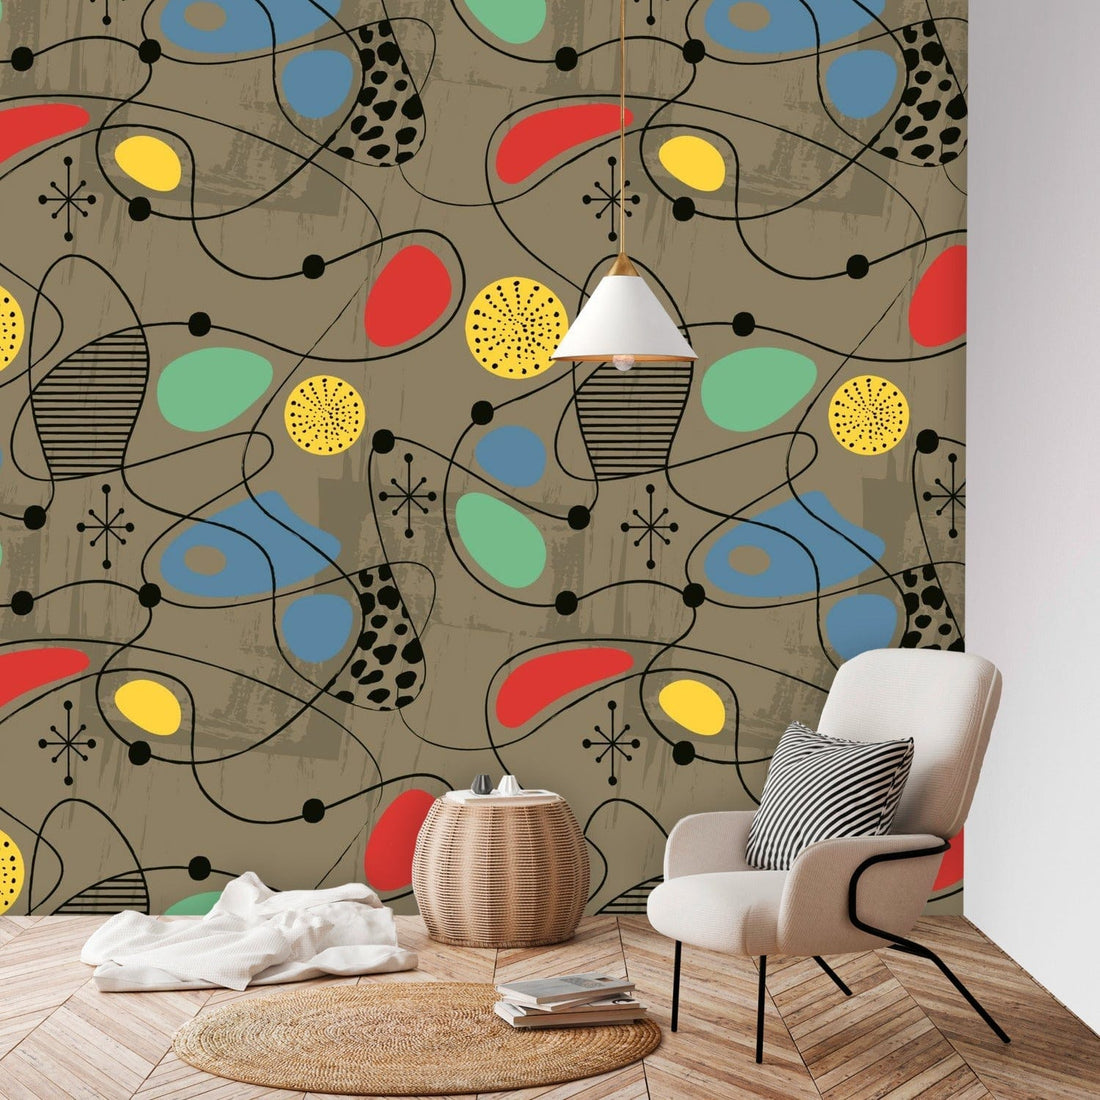 Mid Century Modern Wallpaper Sand Brown, Abstract Retro Atomic Starburst Peel And Stick Wall Murals Wallpaper H96 x W100